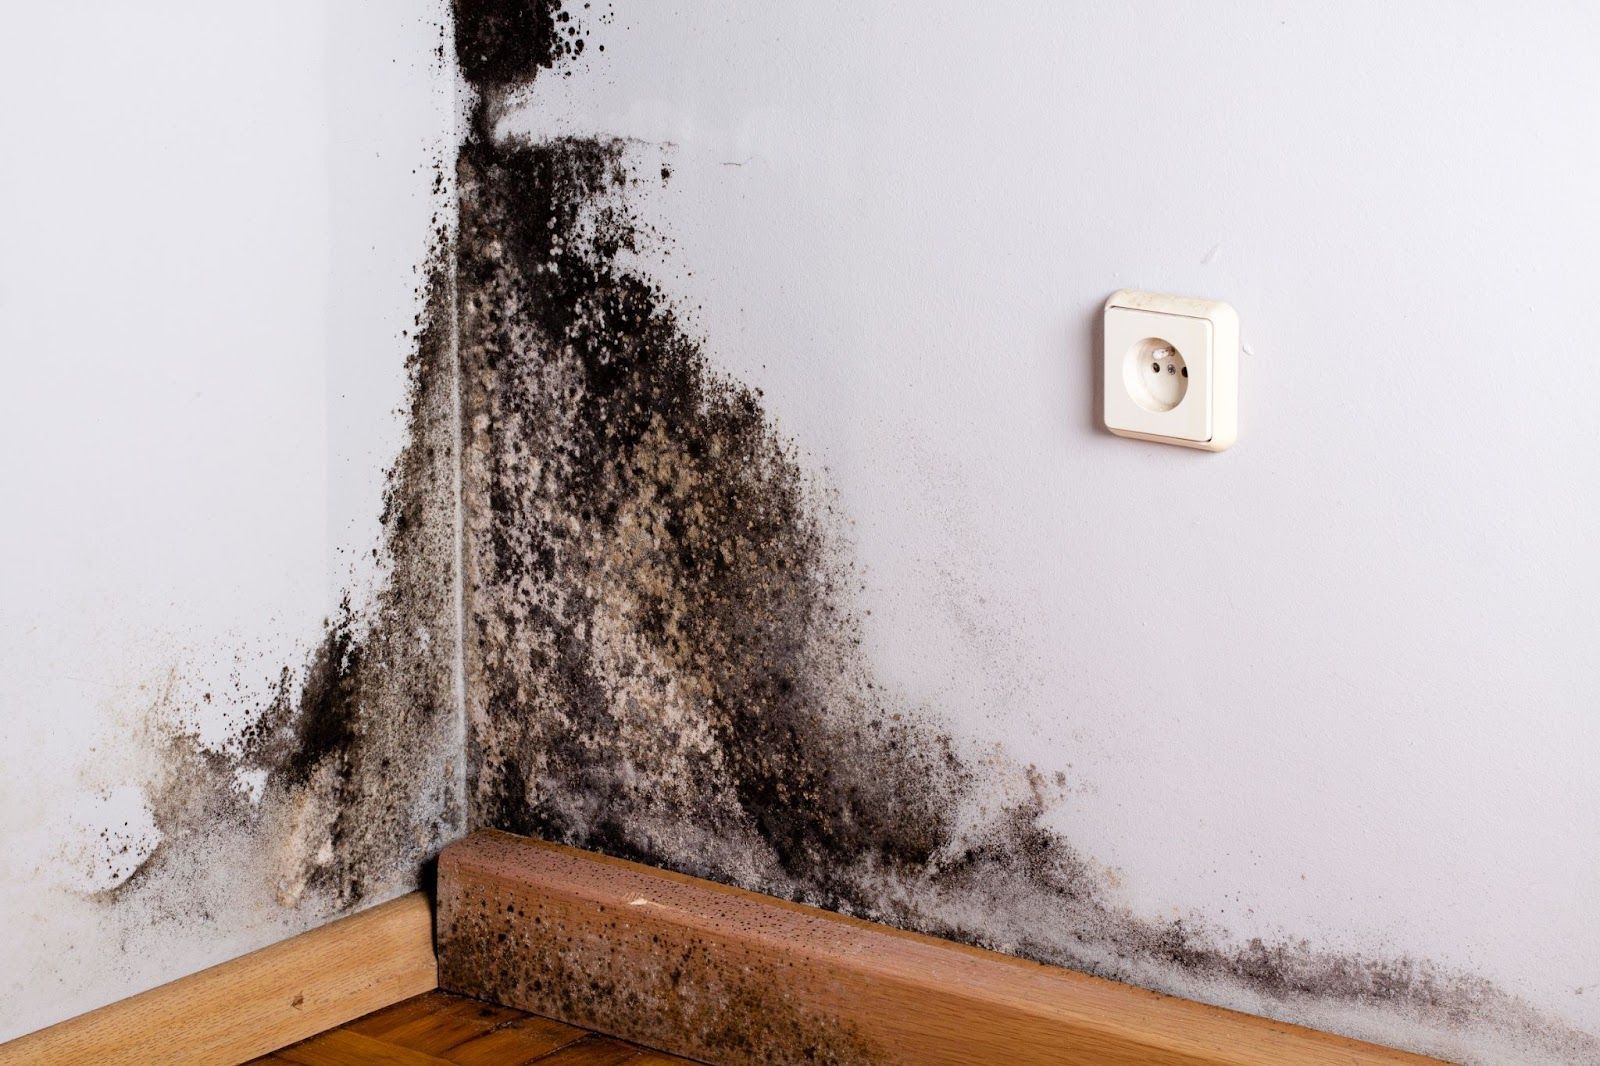 If your home has water damage, it may be time to hire a professional